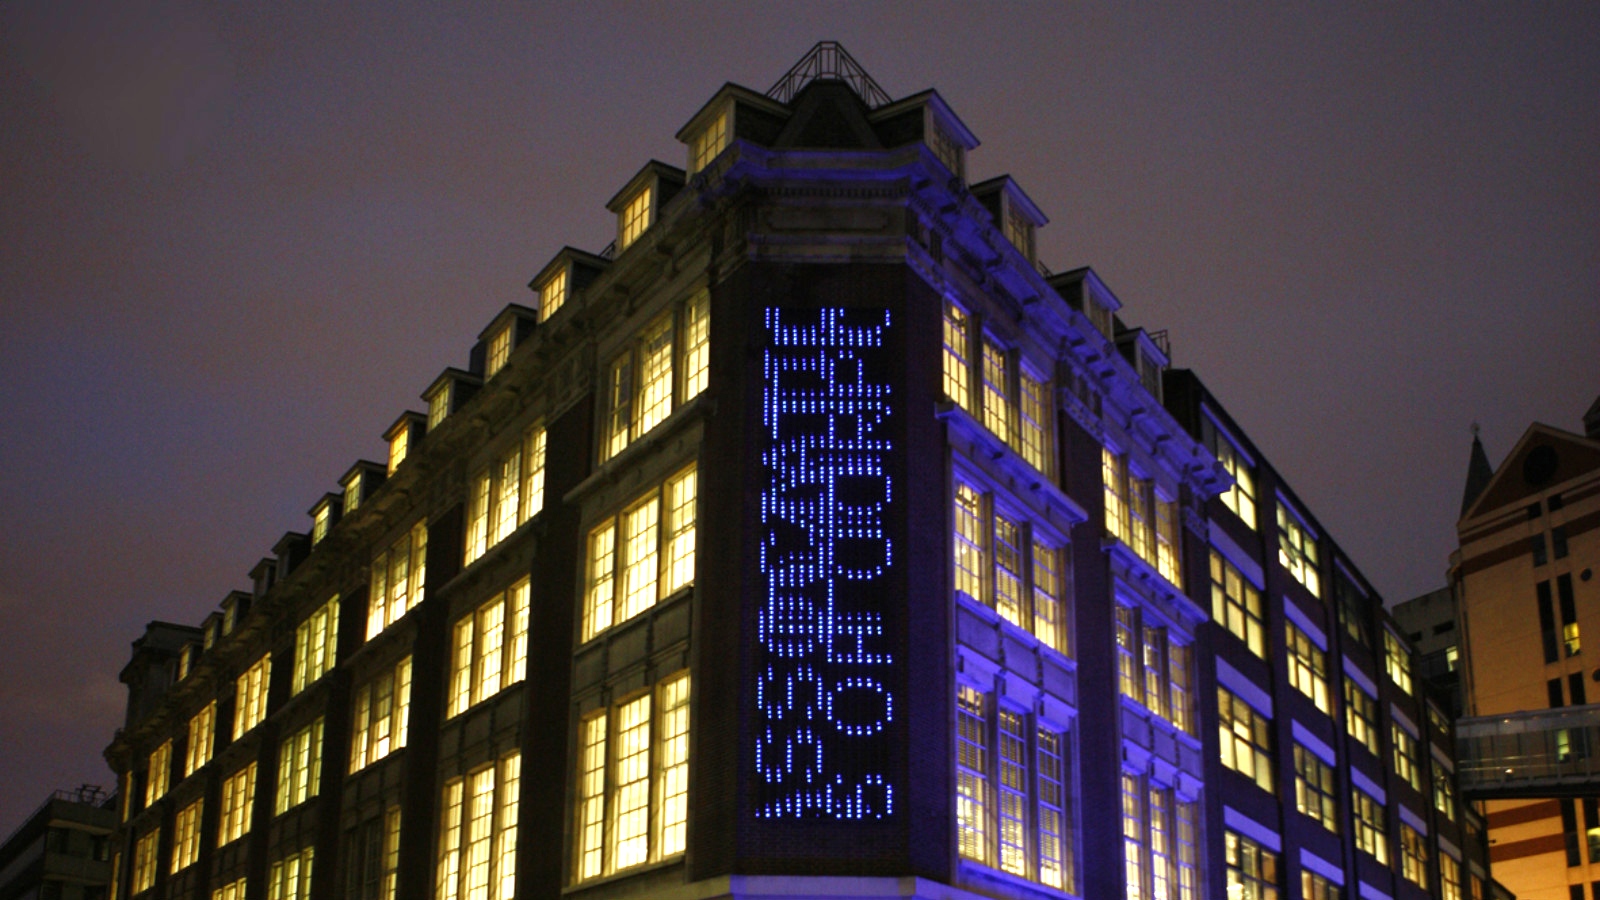 A view of LSE Library from outside at night with a focus on the Bluerain artwork on the corner of the building.